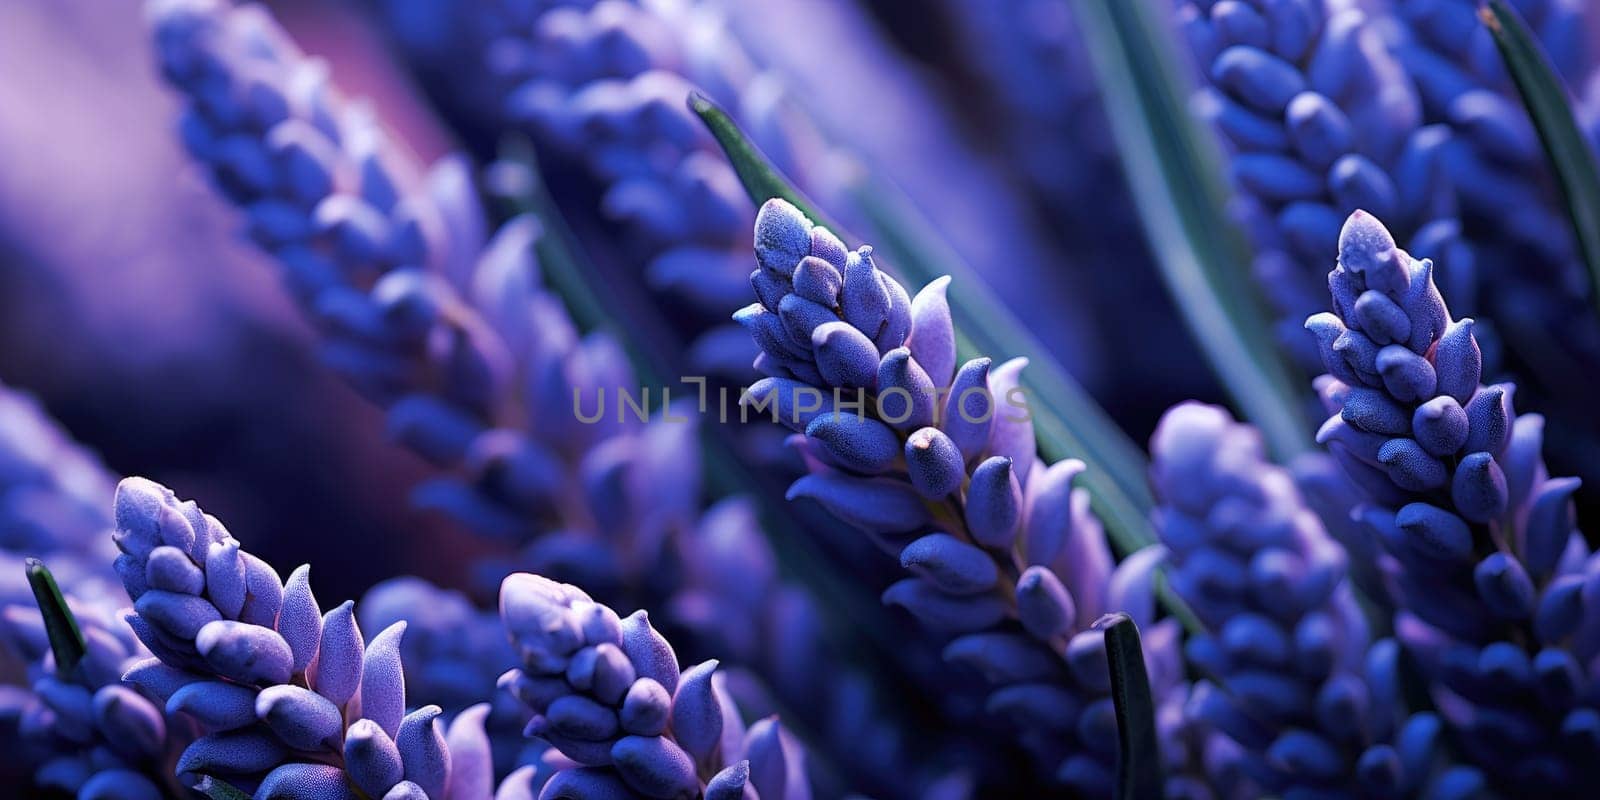 Macro detail to a small aromatic evergreen shrub of the mint family, with narrow leaves and bluish purple flowers, nature concept by Kadula